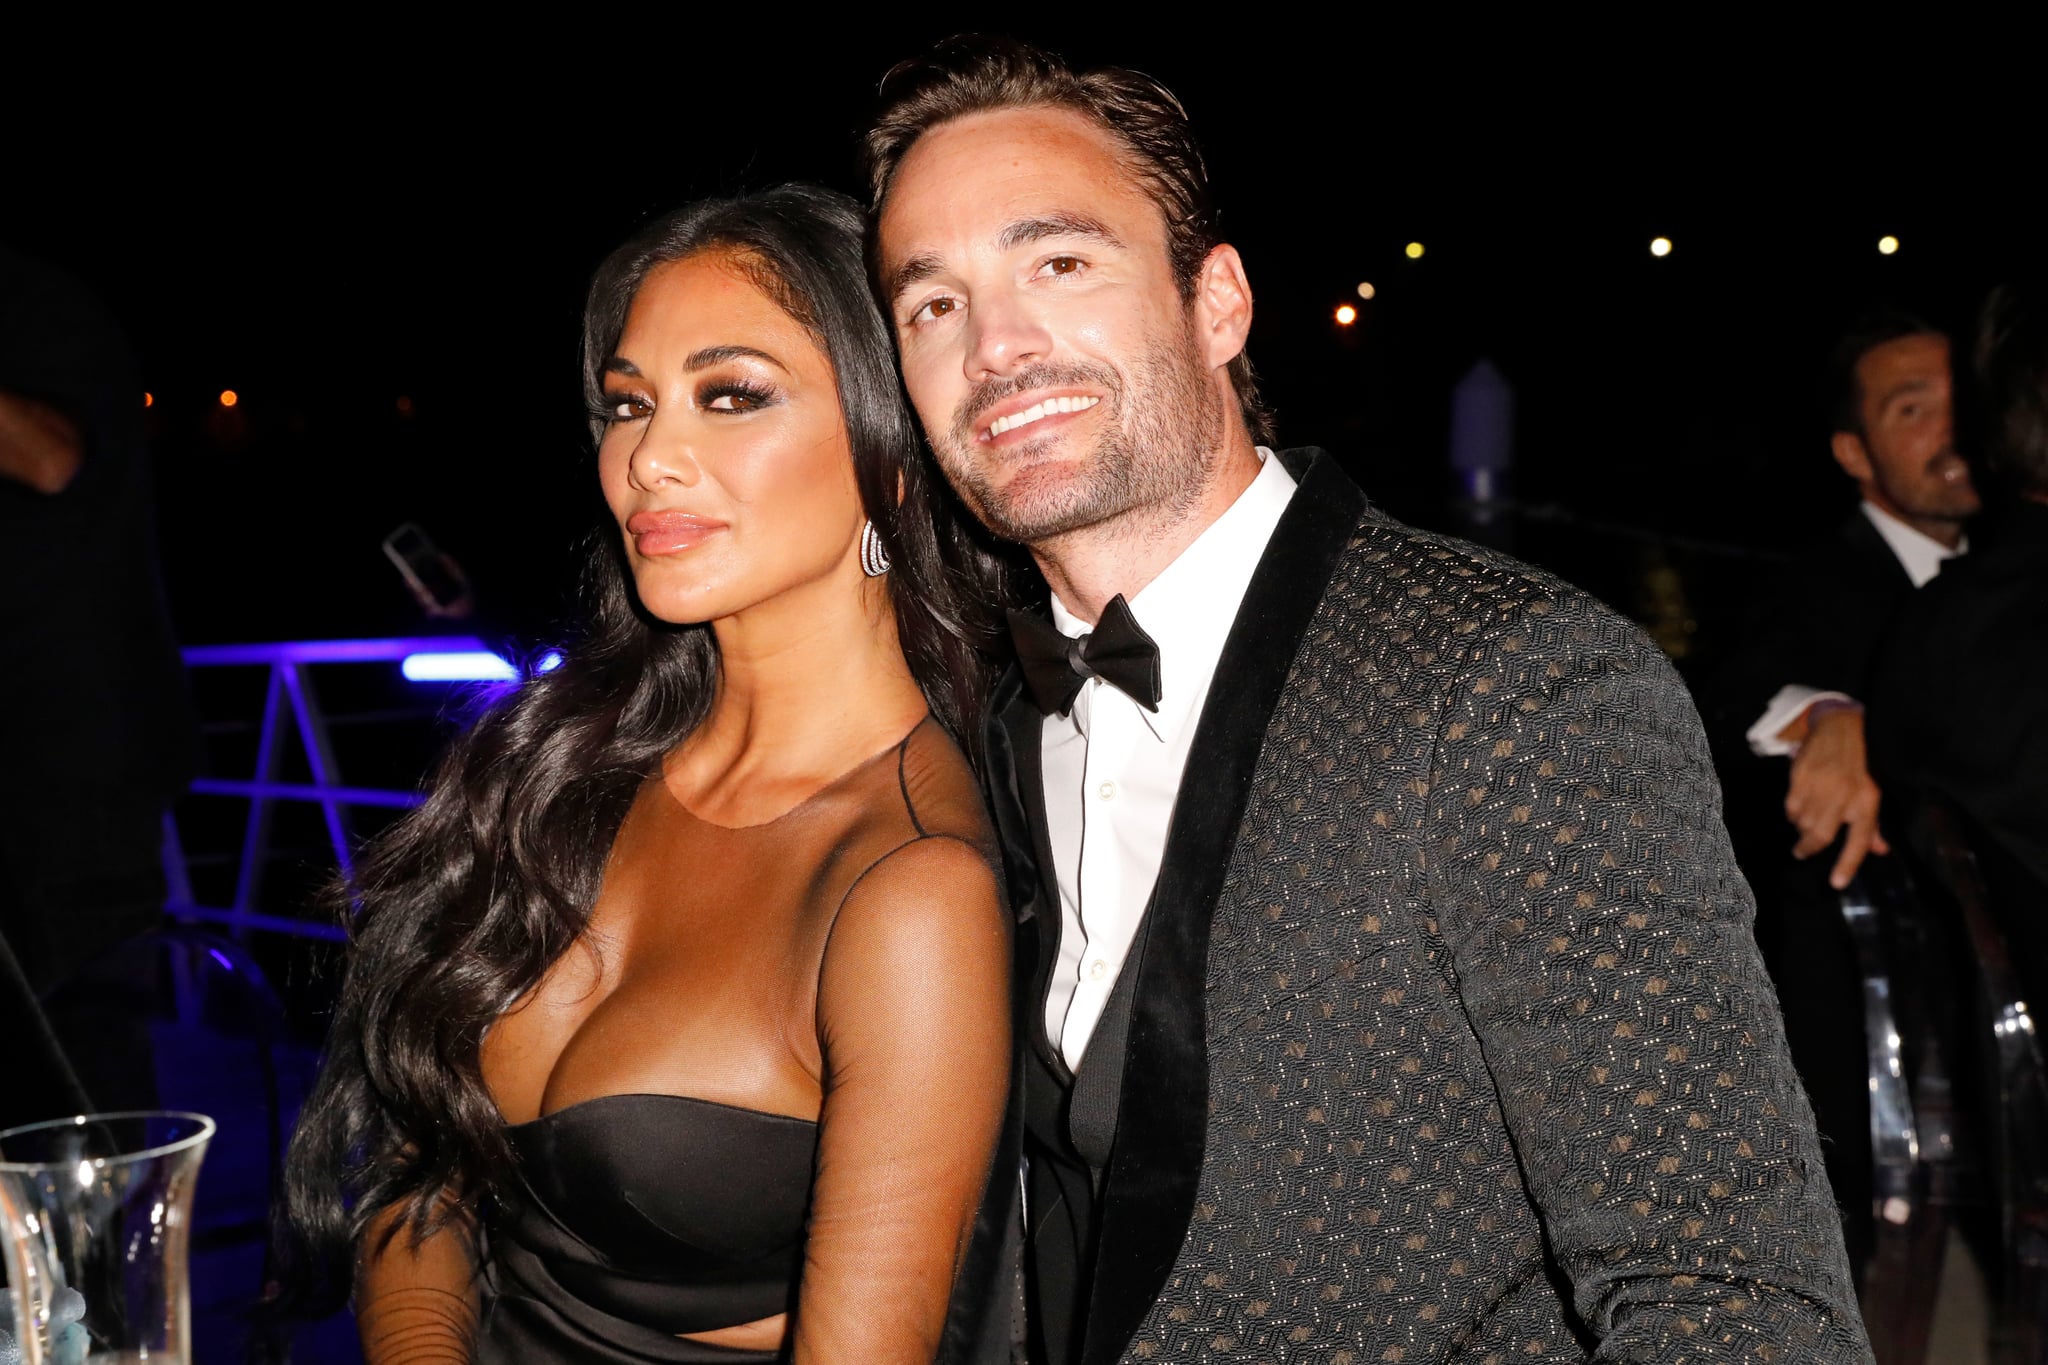 VENICE, ITALY - SEPTEMBER 10:  Nicole Scherzinger and Thom Evans attend the amfAR Venice gala 2021 on September 10, 2021 in Venice, Italy. (Photo by Claudio Lavenia/amfAR/Getty Images for amfAR)